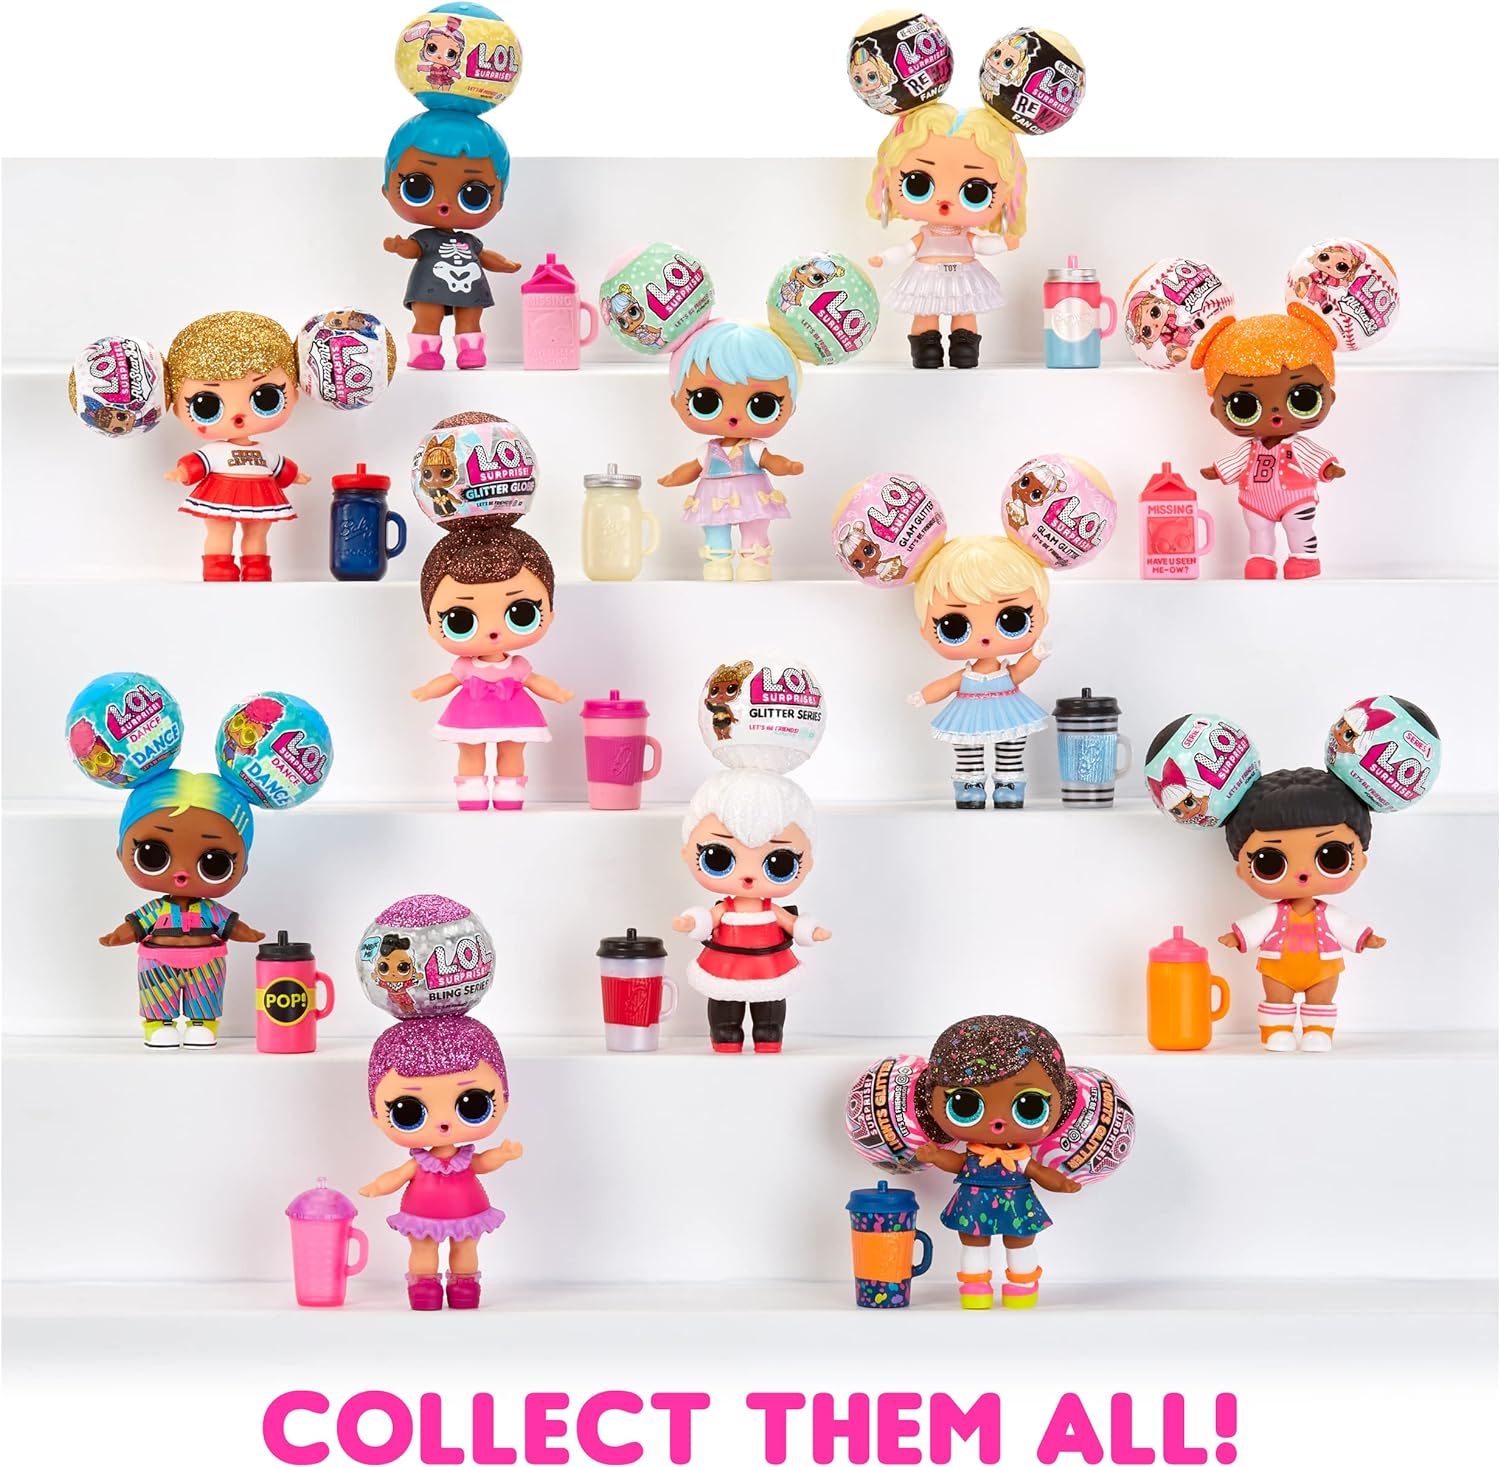 L.O.L. Surprise! Sooo Mini with Collectible Doll, 8 Surprises, Mini L.O.L. Surprise! Balls, Limited Edition Dolls- Great Gift for Girls Age 4+